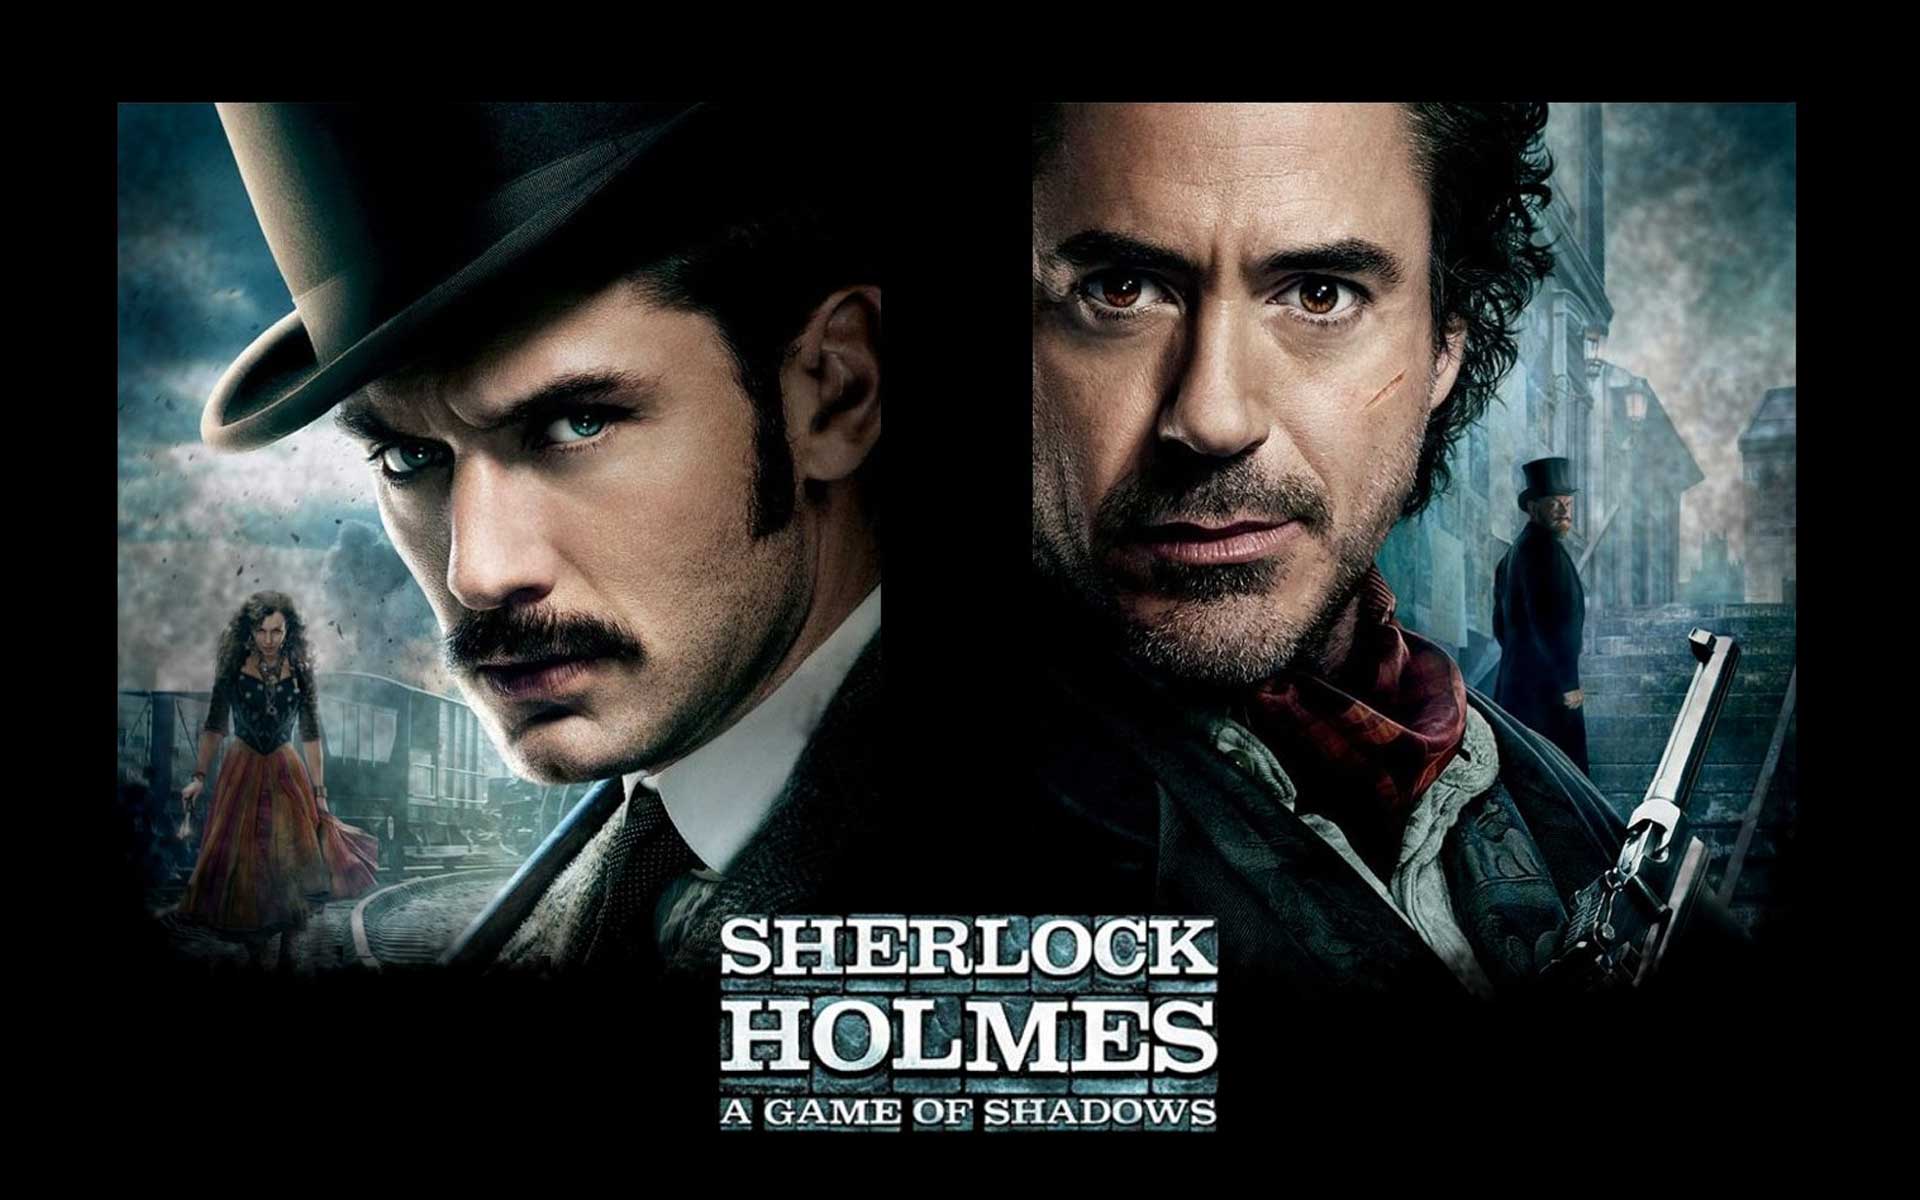 Sherlock Holmes Poster 1920x1200 Wallpapers, 1920x1200 Wallpapers